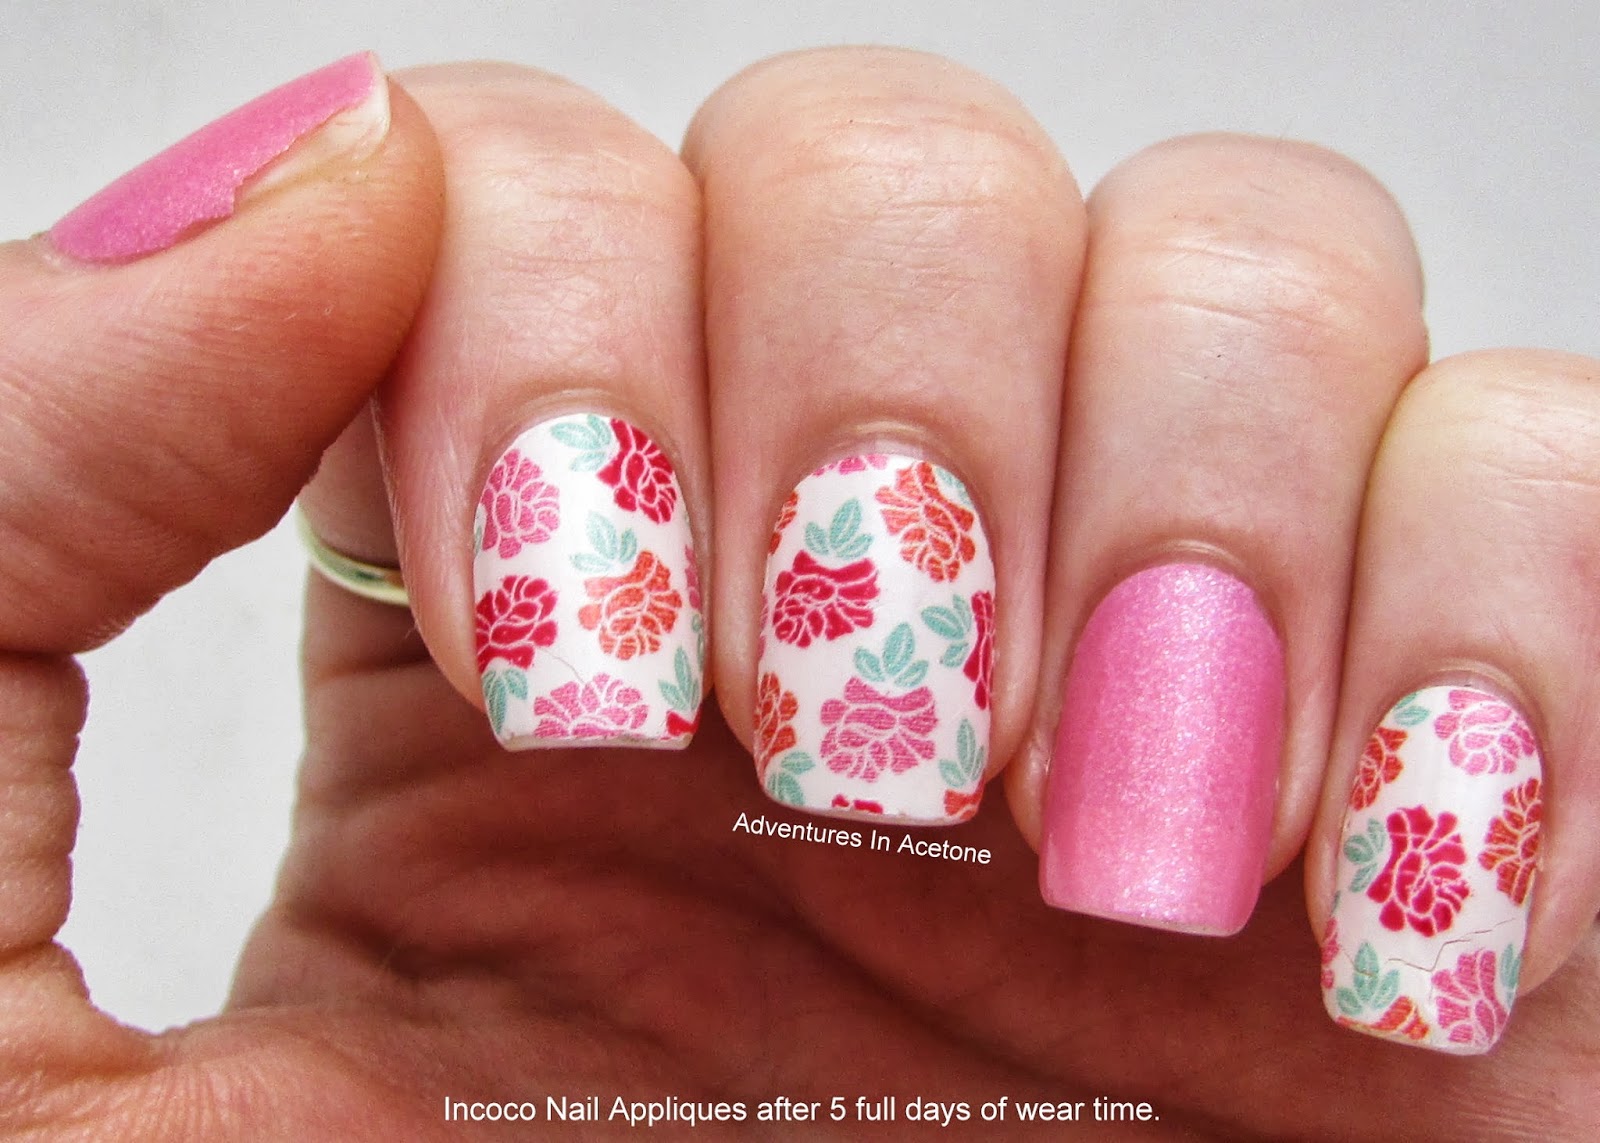 Incoco Real Nail Polish Appliqué Review! - Adventures In Acetone